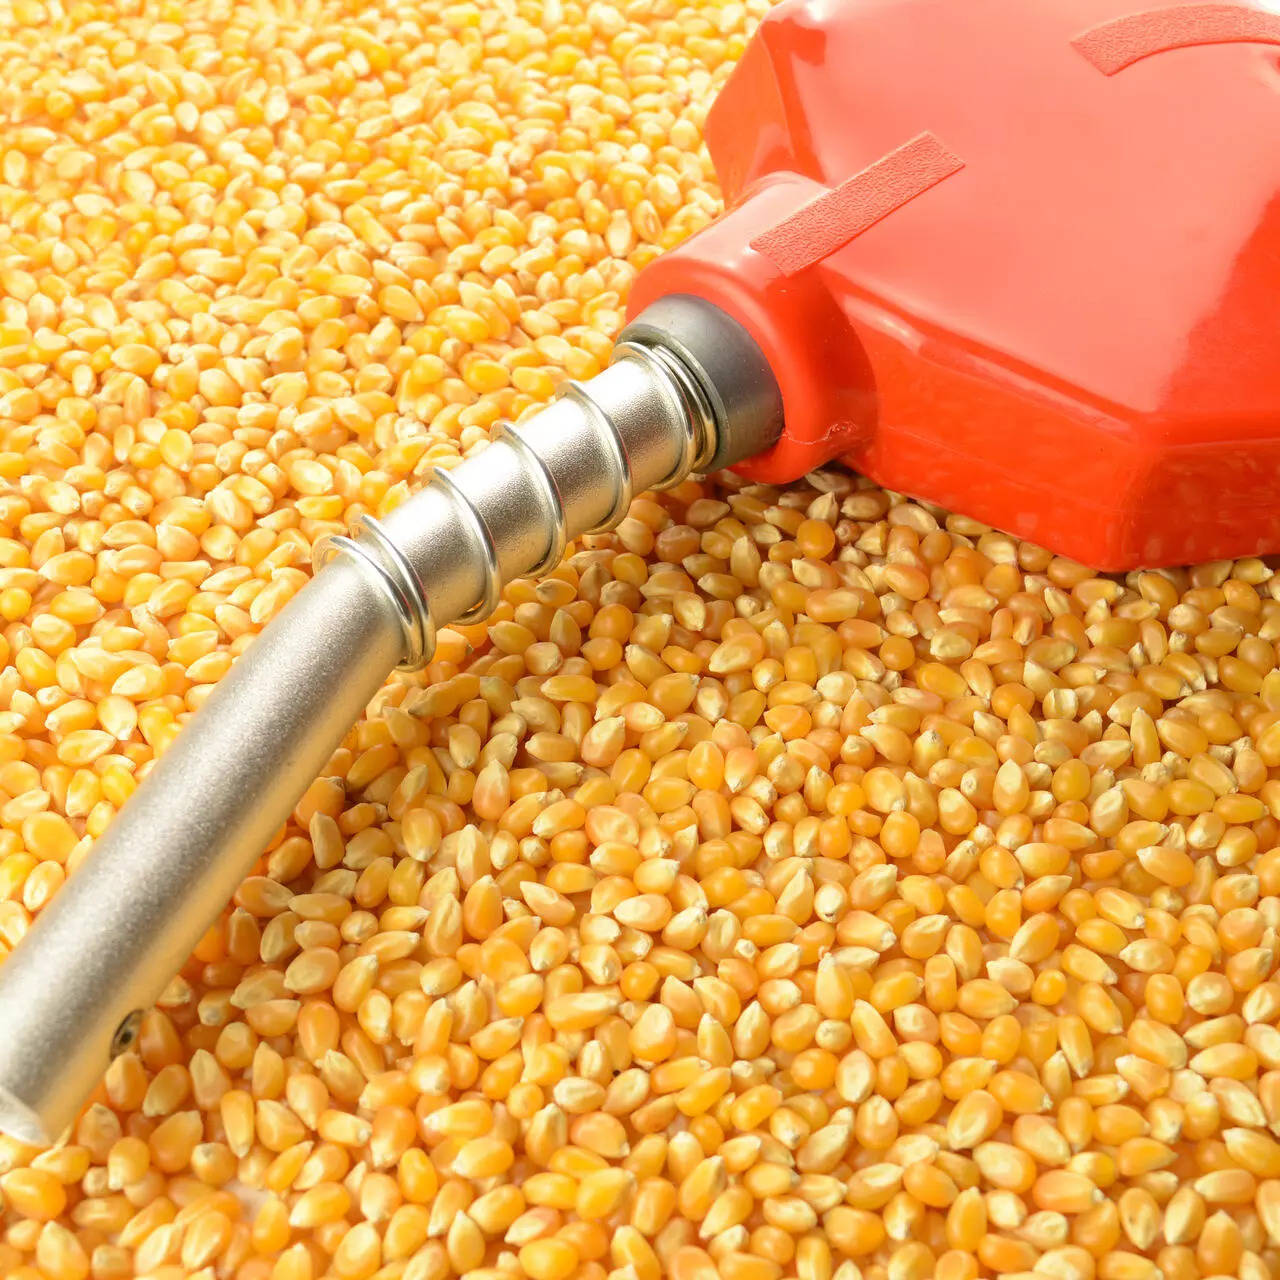  In December, the Environmental Protection Agency issued a long-awaited biofuel blending mandate proposal that cut ethanol requirements for 2020 and 2021 but restored them to 15 billion gallons for 2022.